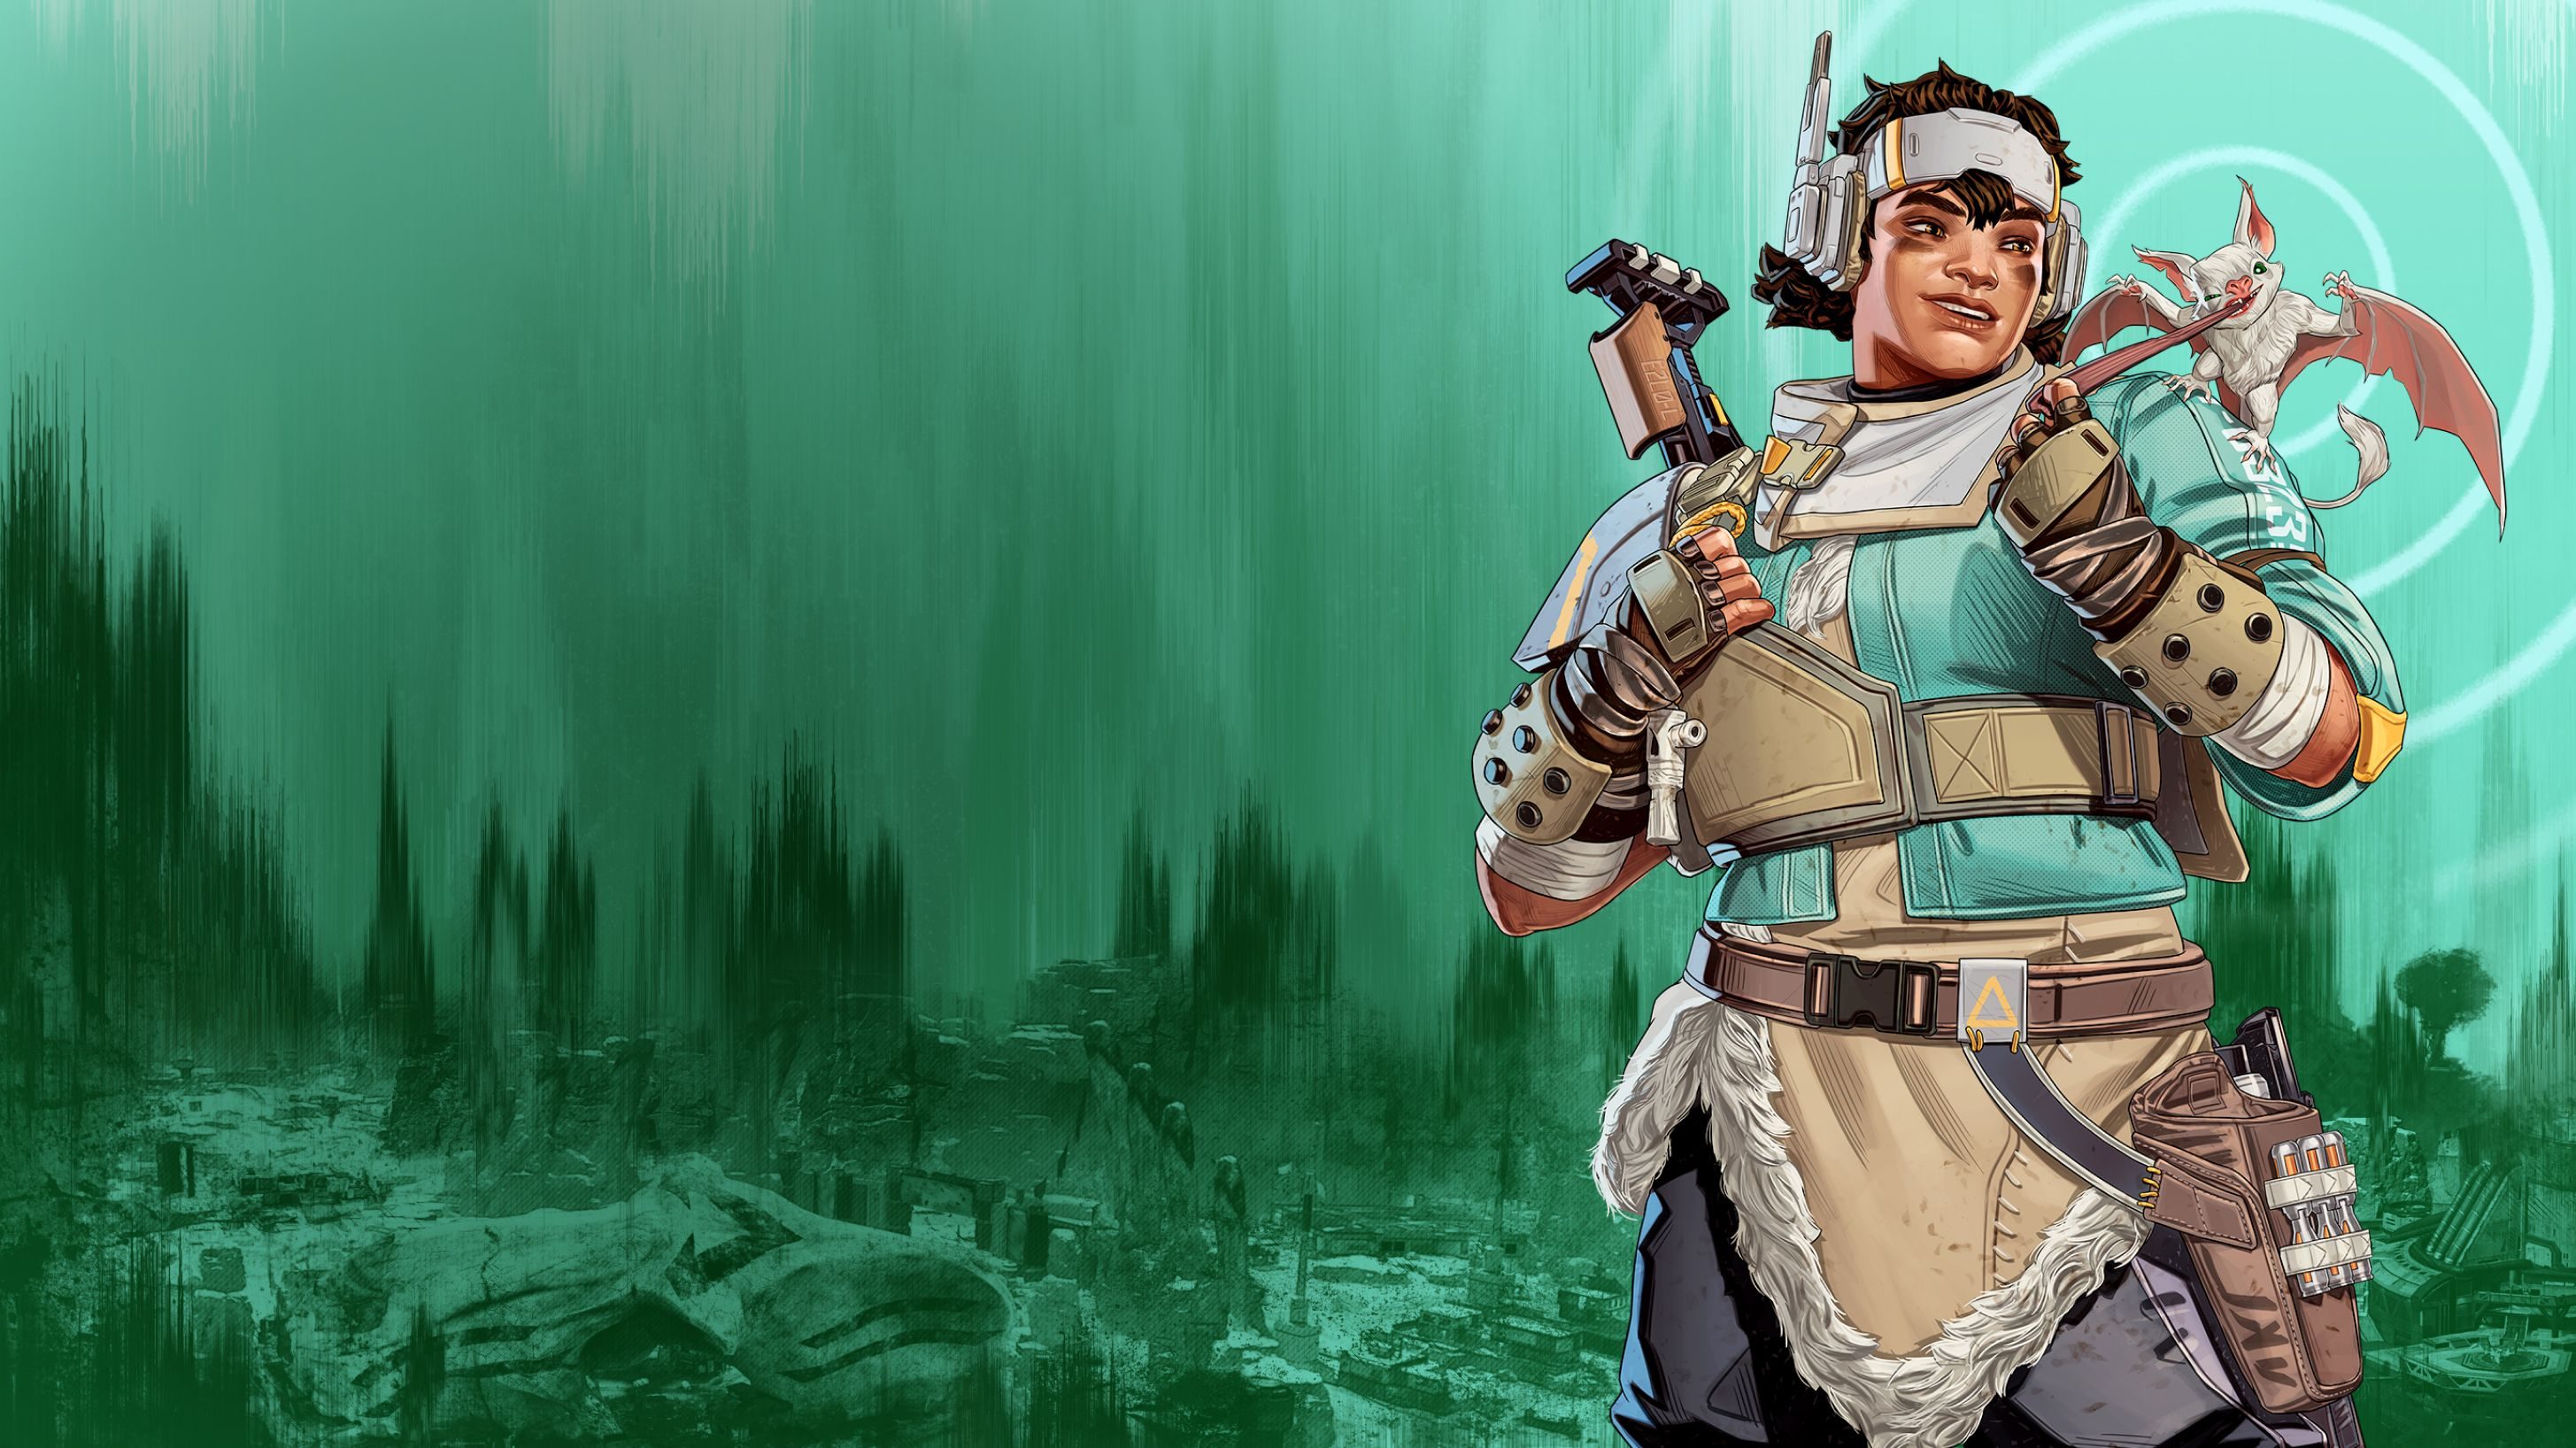 Apex Legends new season bug caused characters to "swap" skills